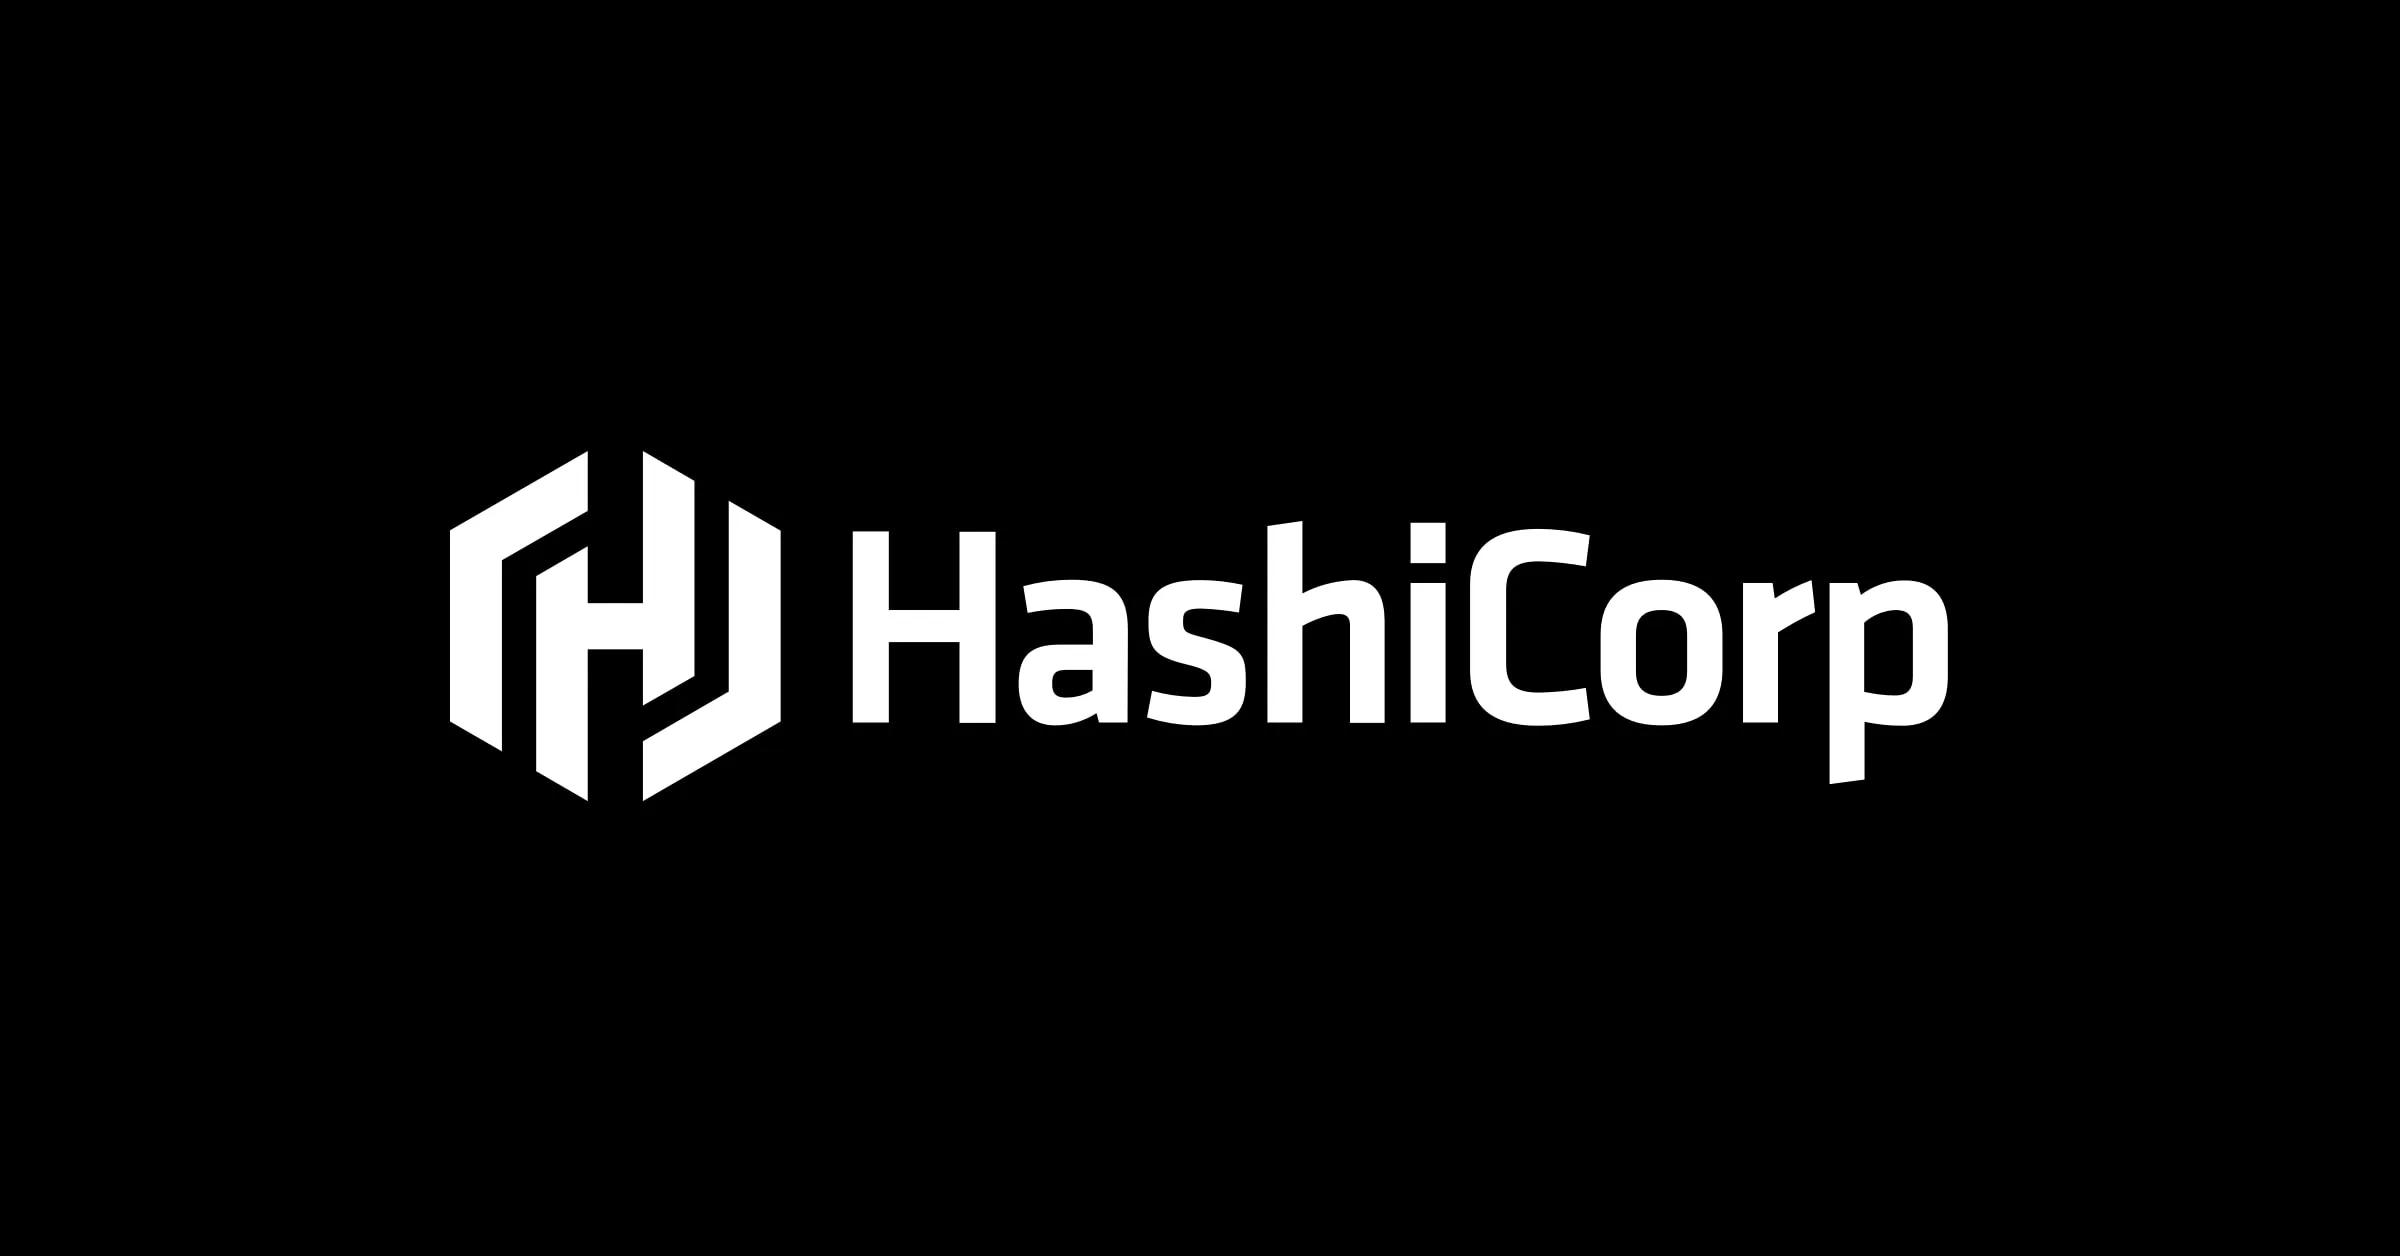 Hashicorp Inc hcp Stock Plunges As Wall Street Reacts to Q1 Performance